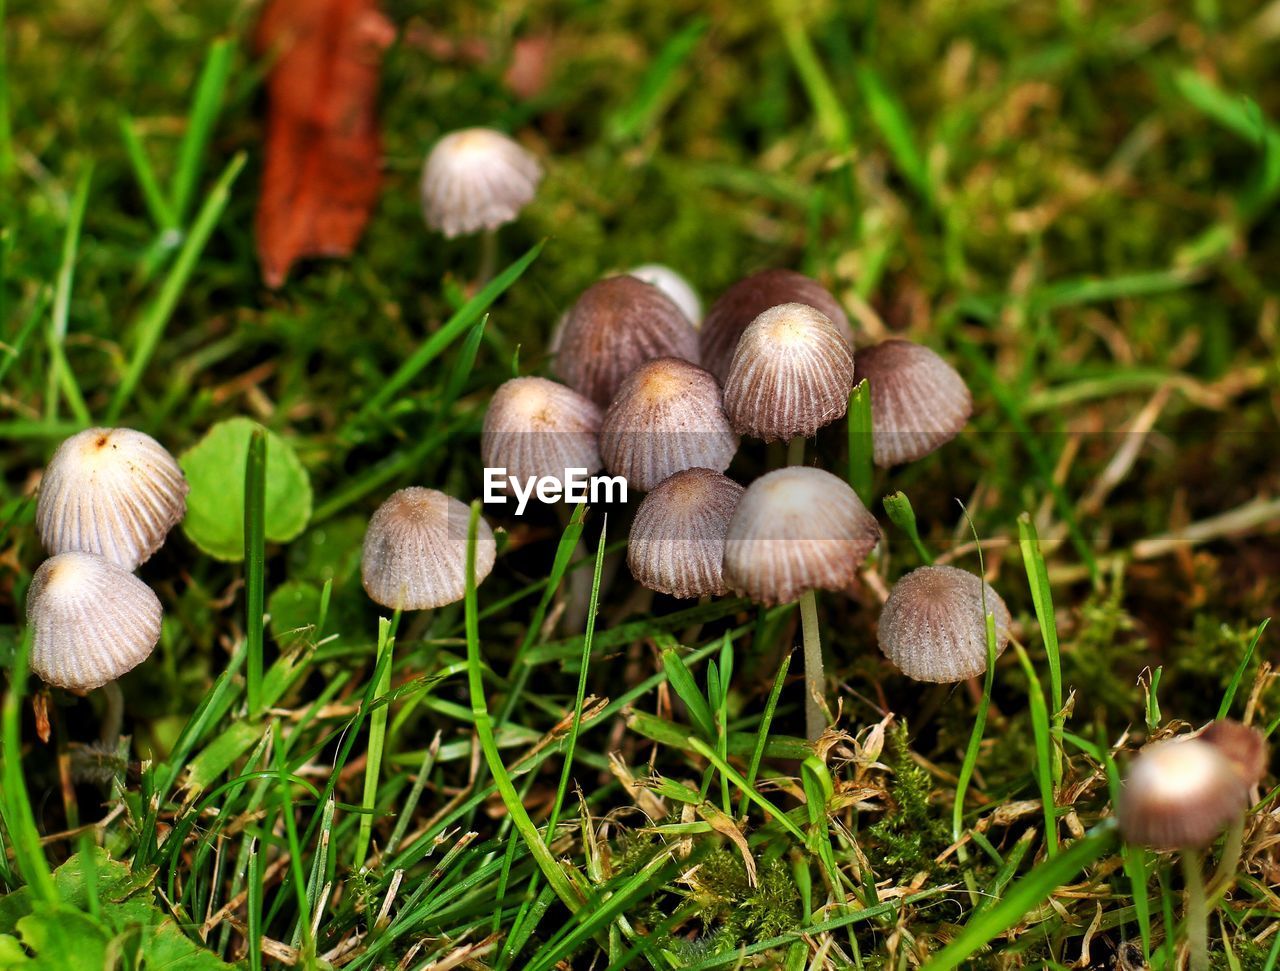 Mushroom Nature Fungus Beauty In Nature Growth Outdoors Toadstool Close-up Plant No People Day Fragility Flower Grass Freshness